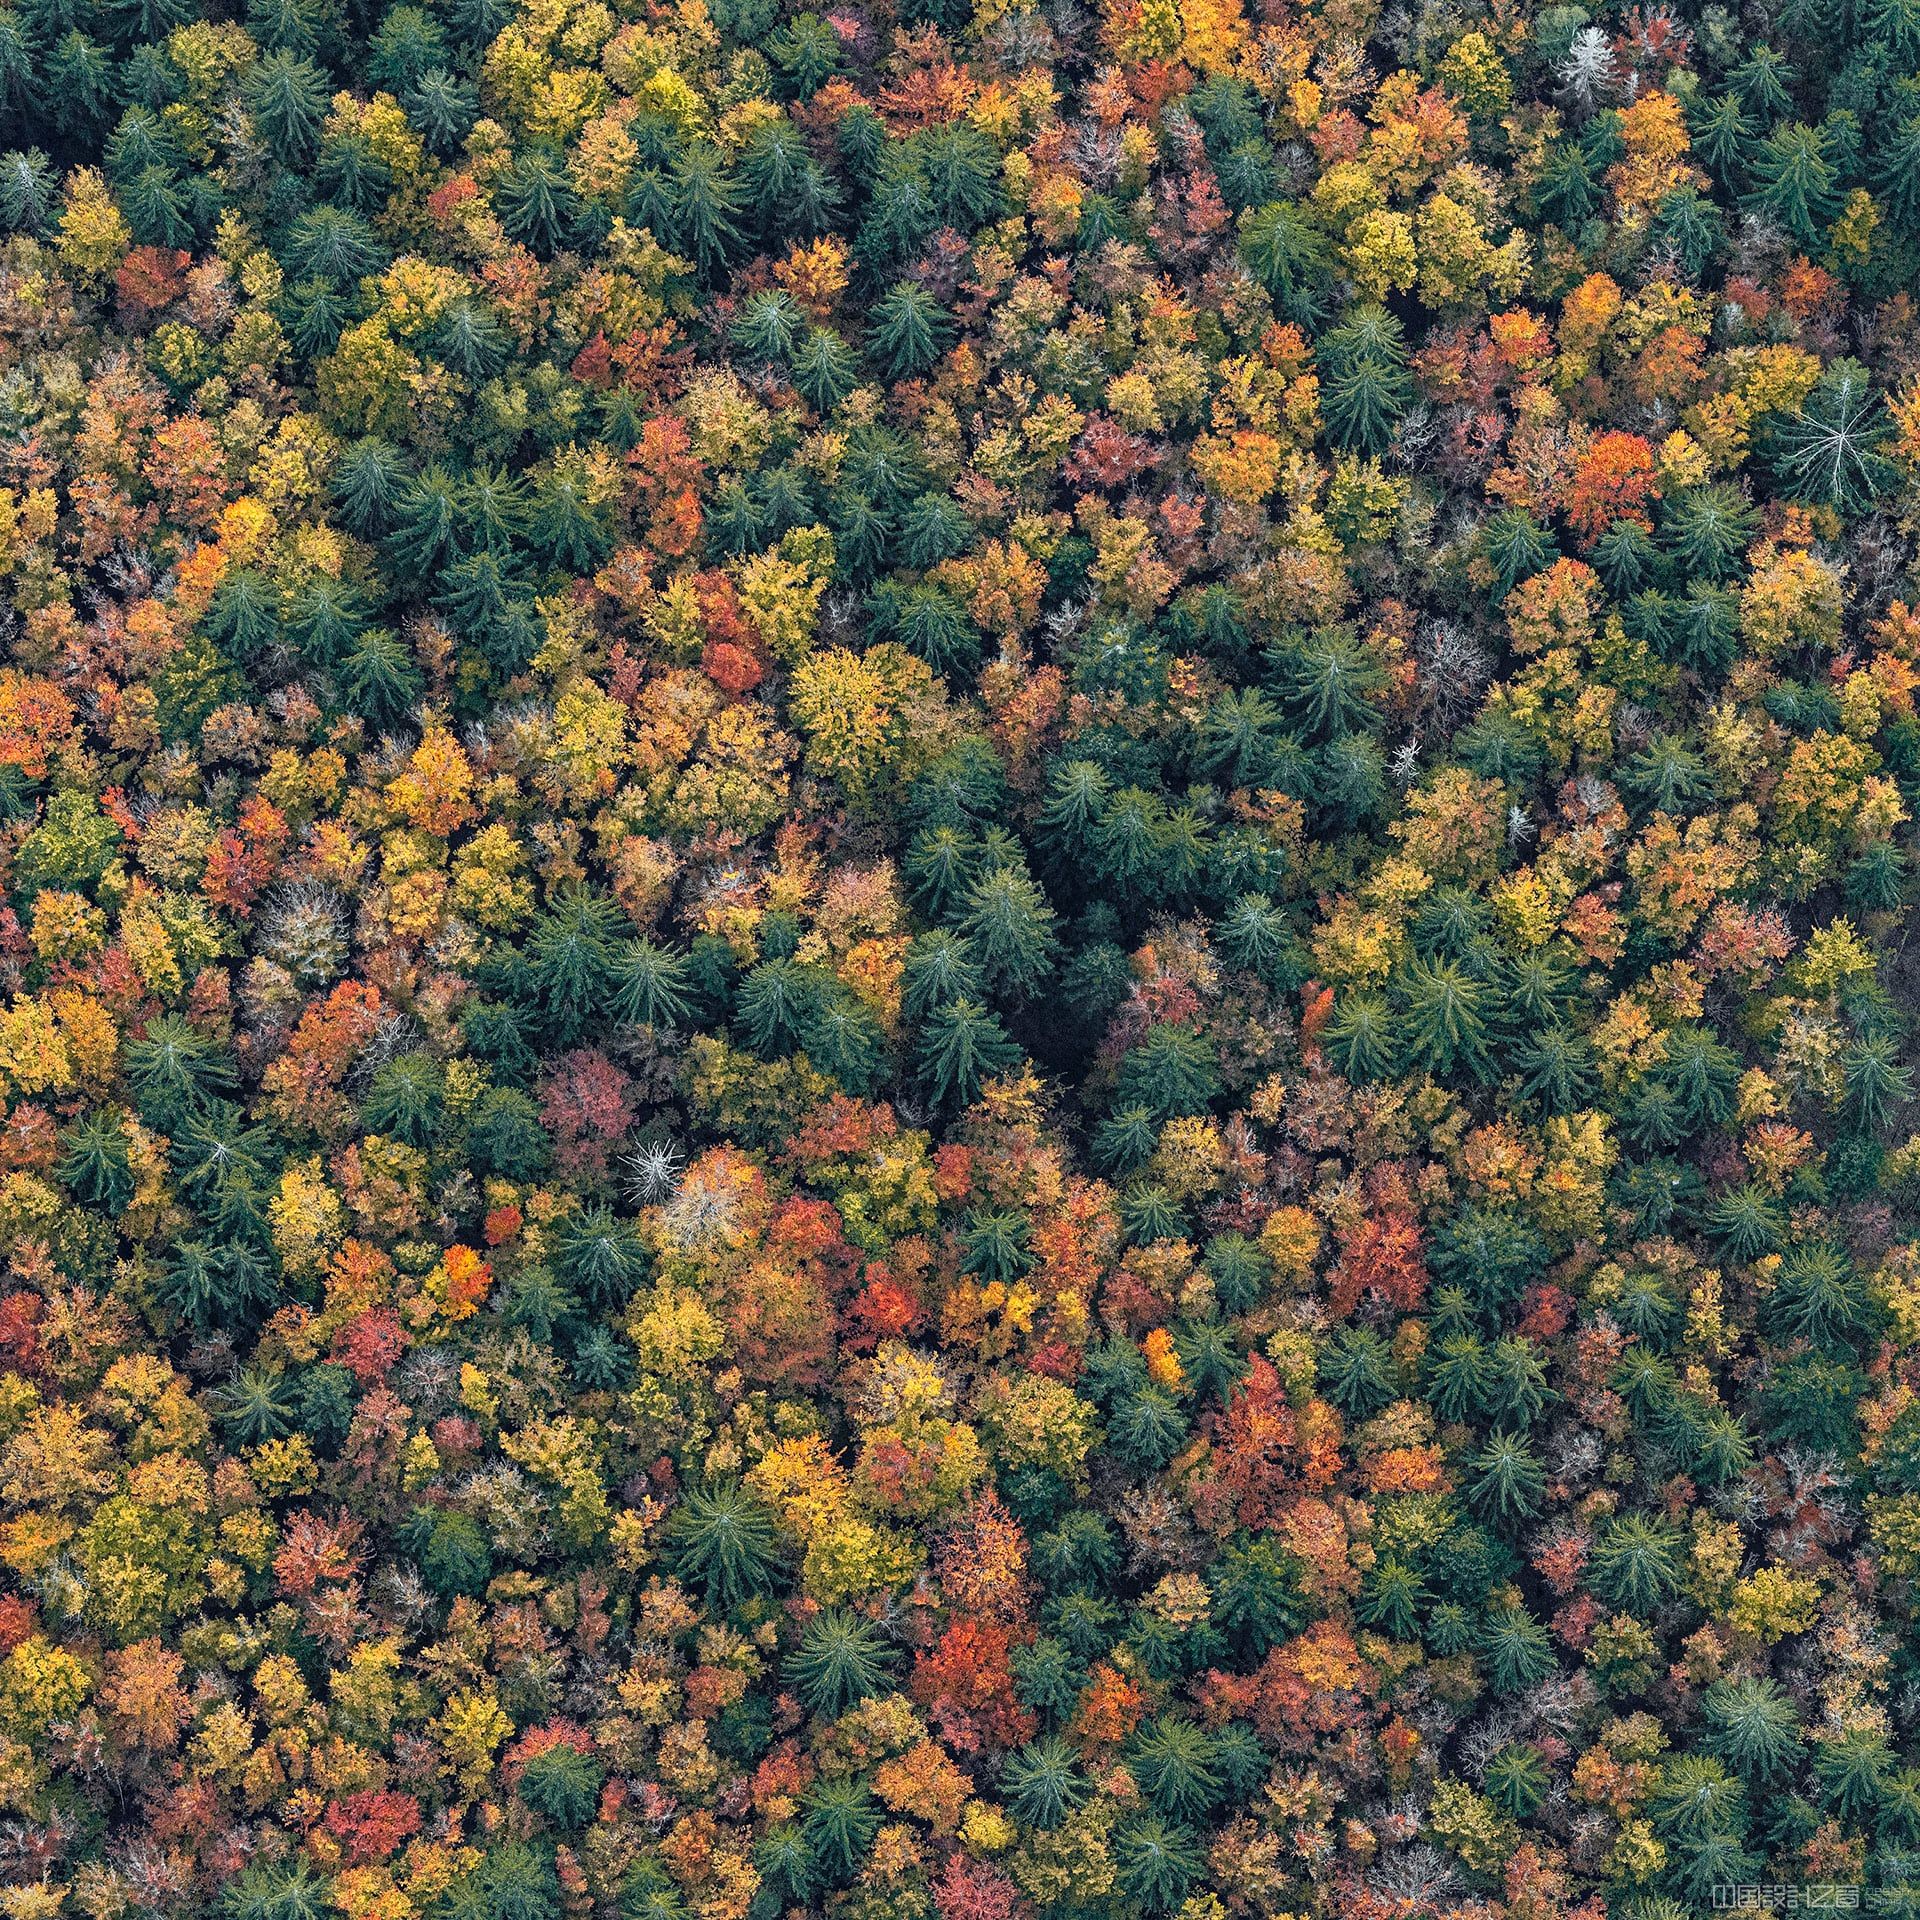 An aerial photo of a forest with autumn leaves